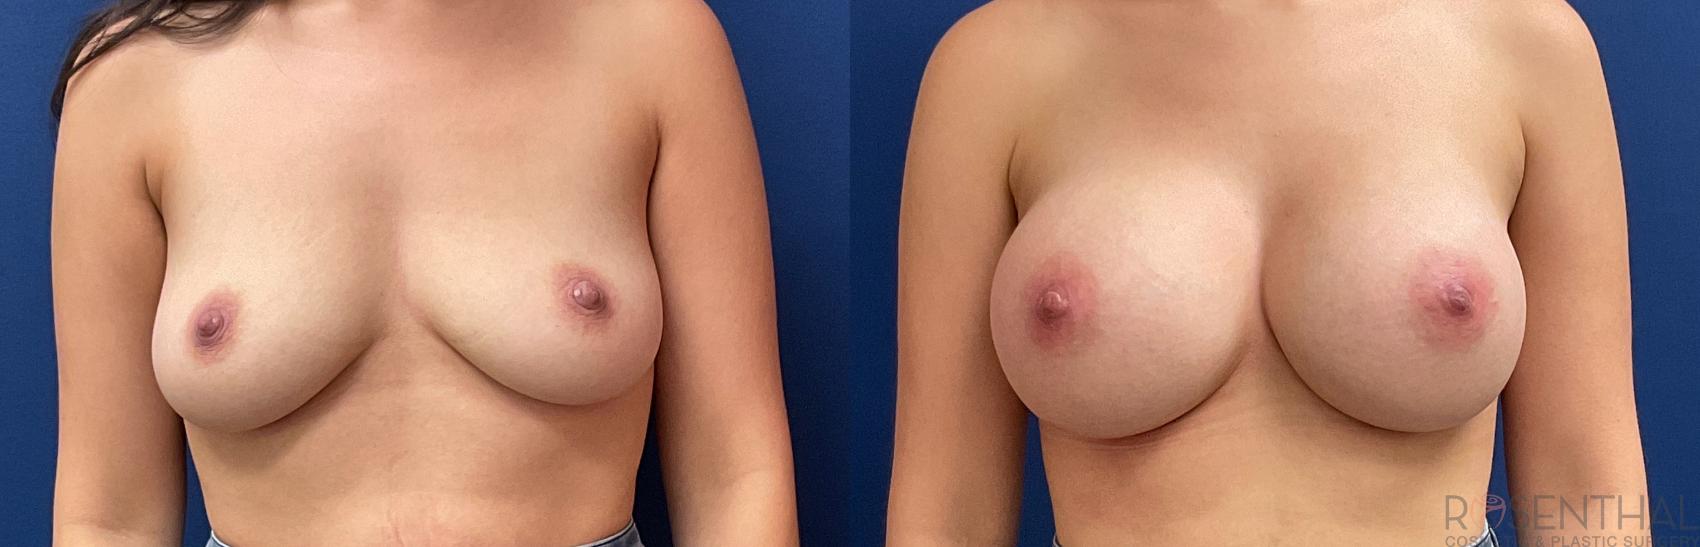 Before & After Breast Augmentation Case 10 Front View in Boynton Beach, FL